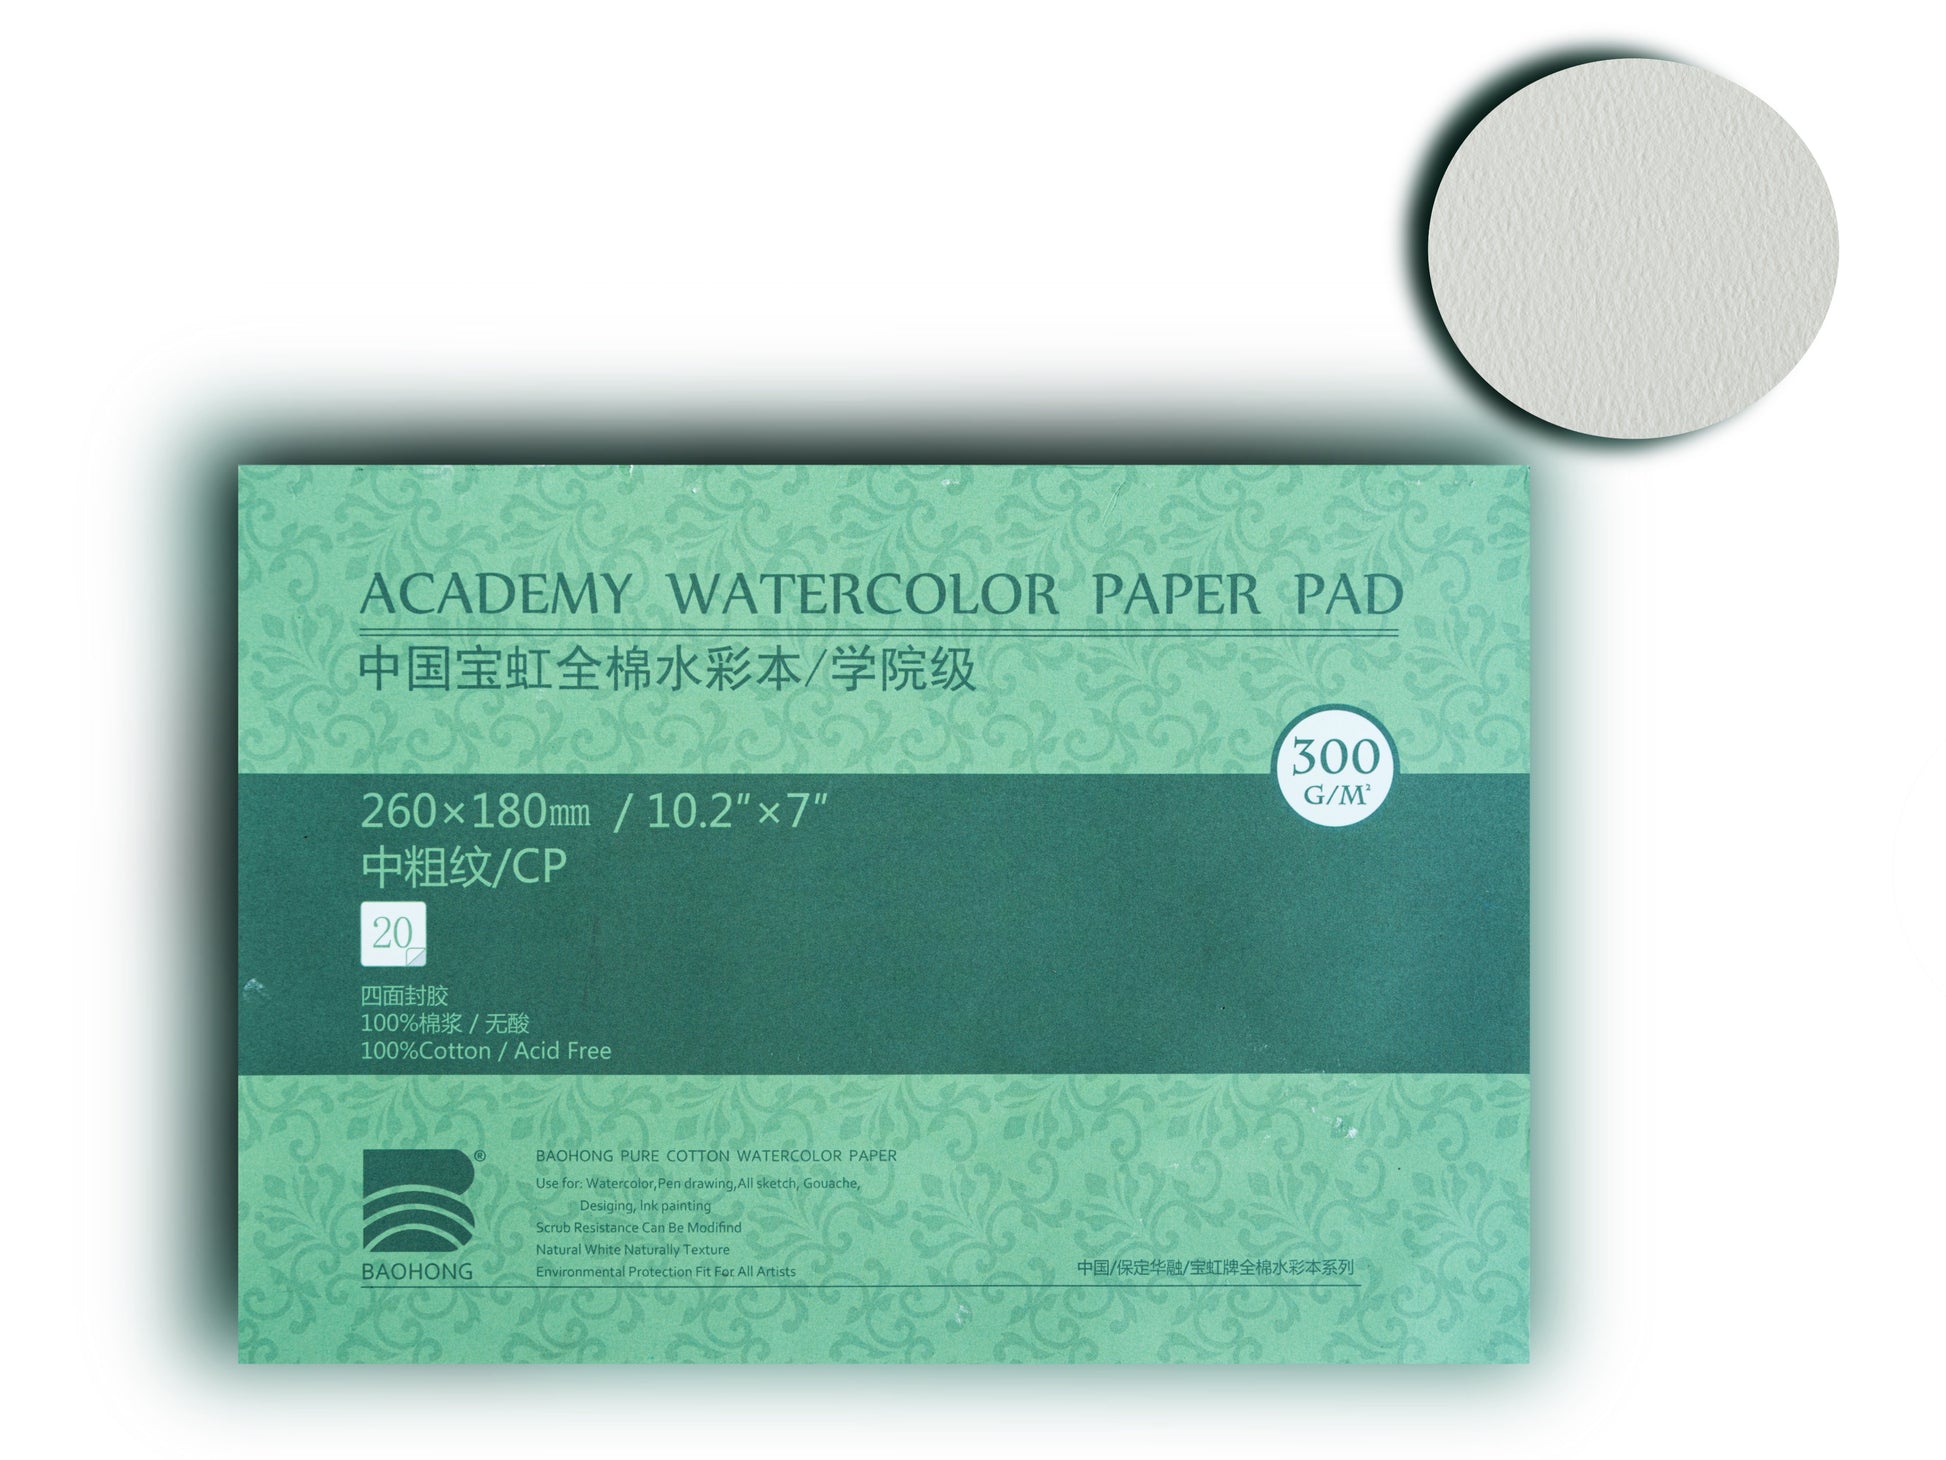 BAOHONG Academy Grade Watercolor Painting Paper, 100%Cotton Cold